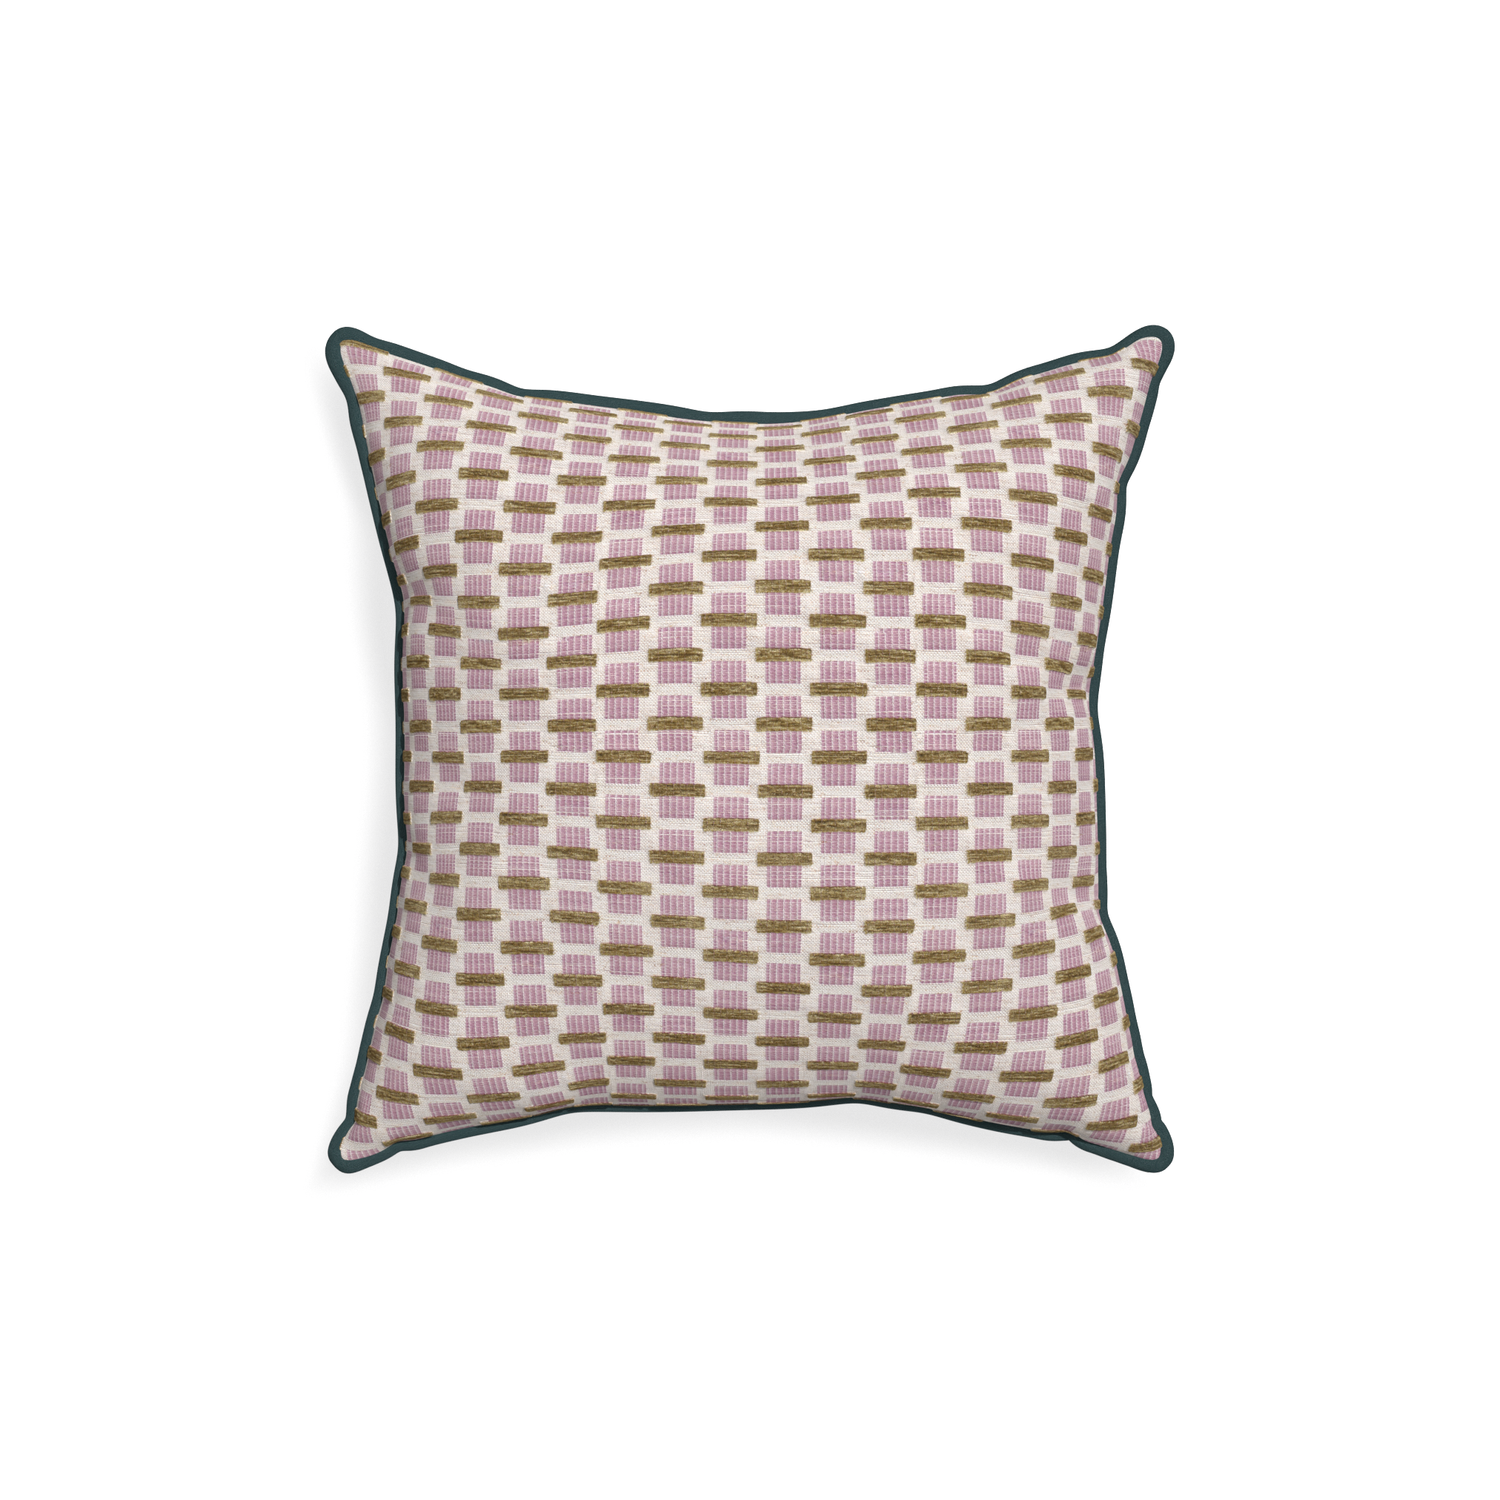 18-square willow orchid custom pink geometric chenillepillow with p piping on white background